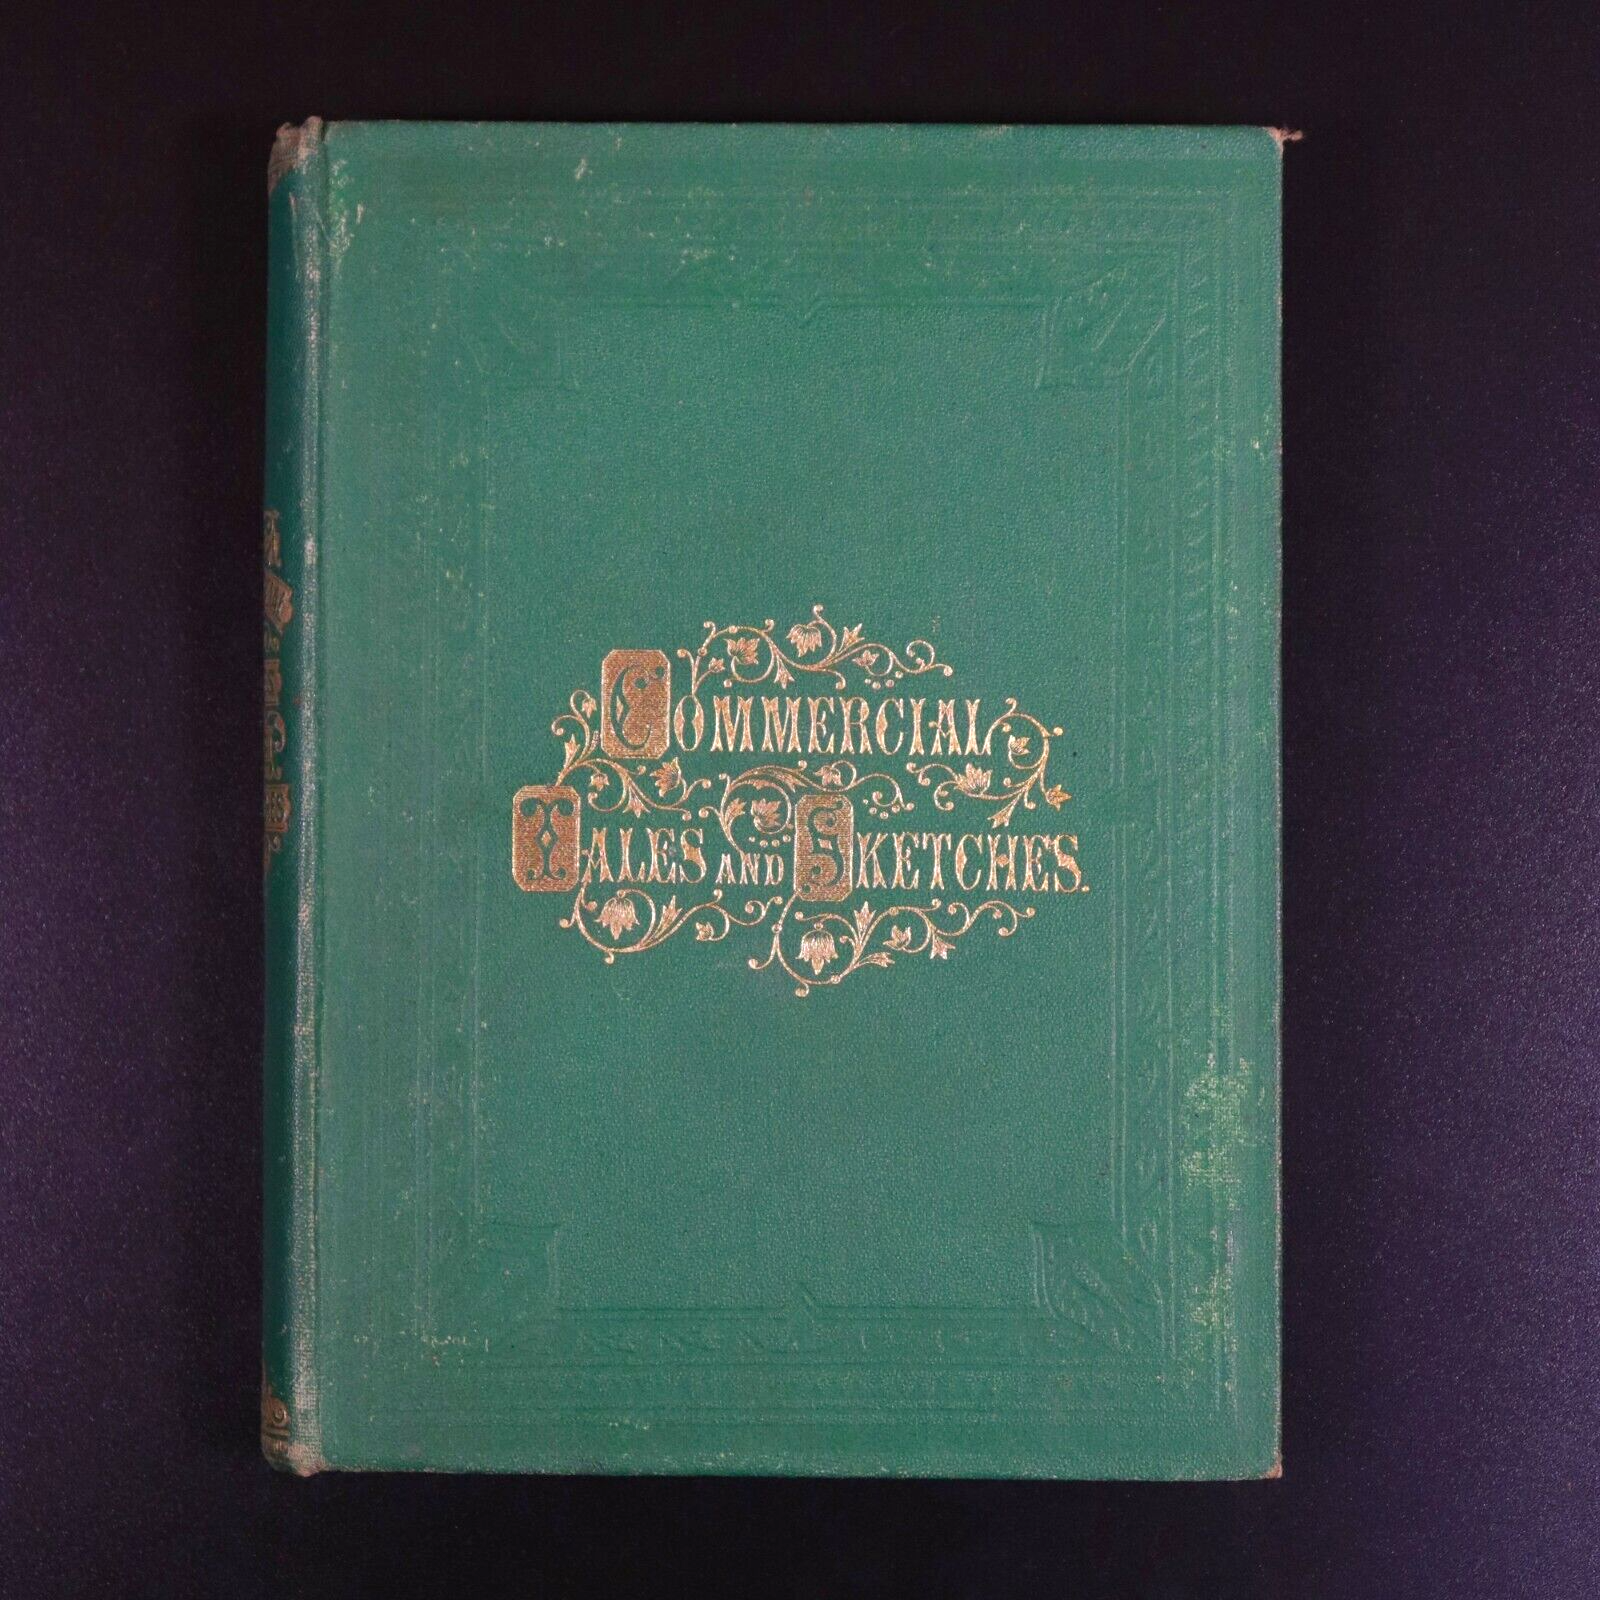 c1870 Commercial Tales & Sketches Antiquarian British Fiction Book